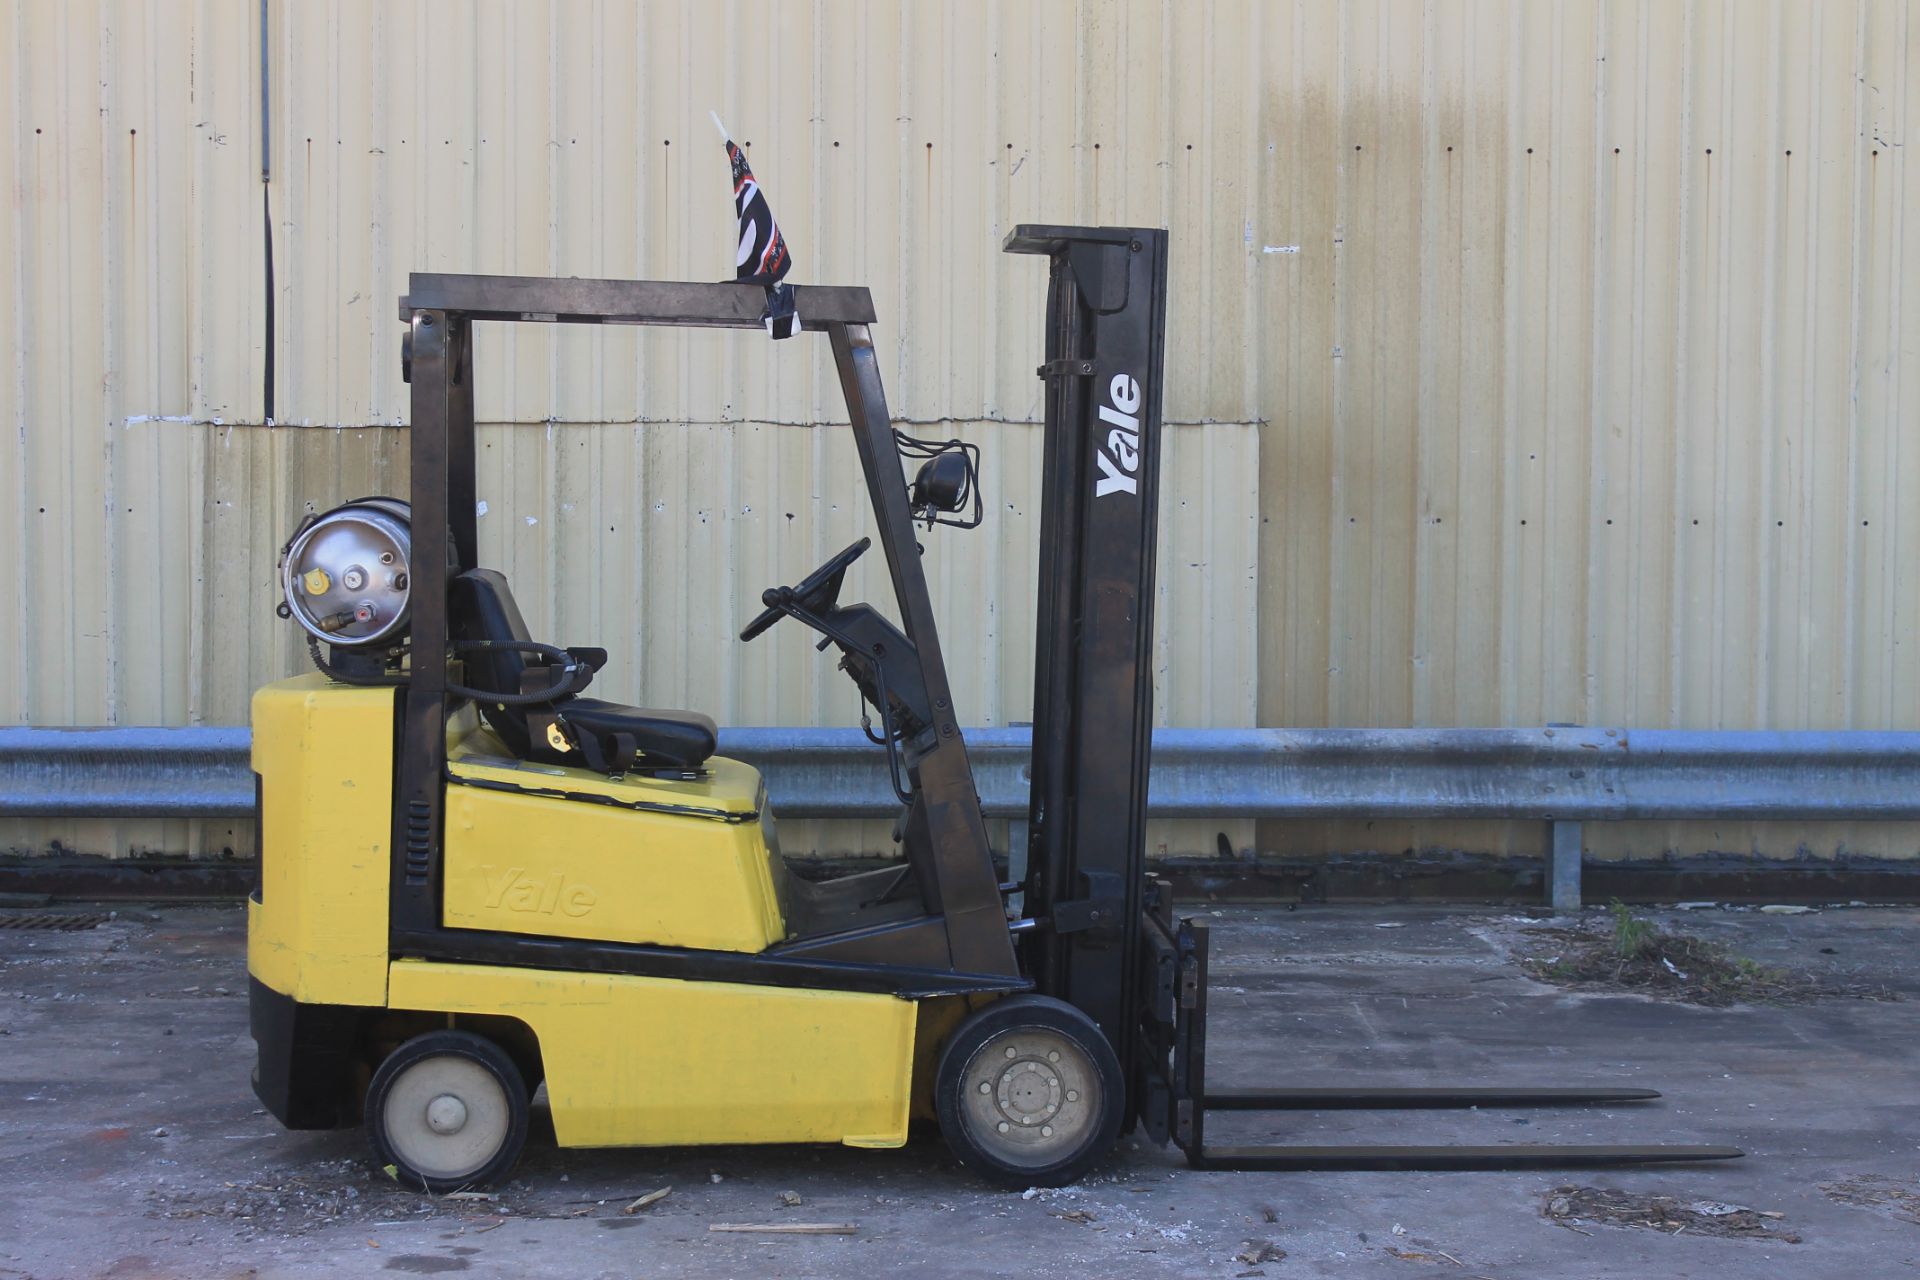 YALE PROPANE FORKLIFT 4000 CAPACITY, 6340 HRS (WATCH VIDEO)